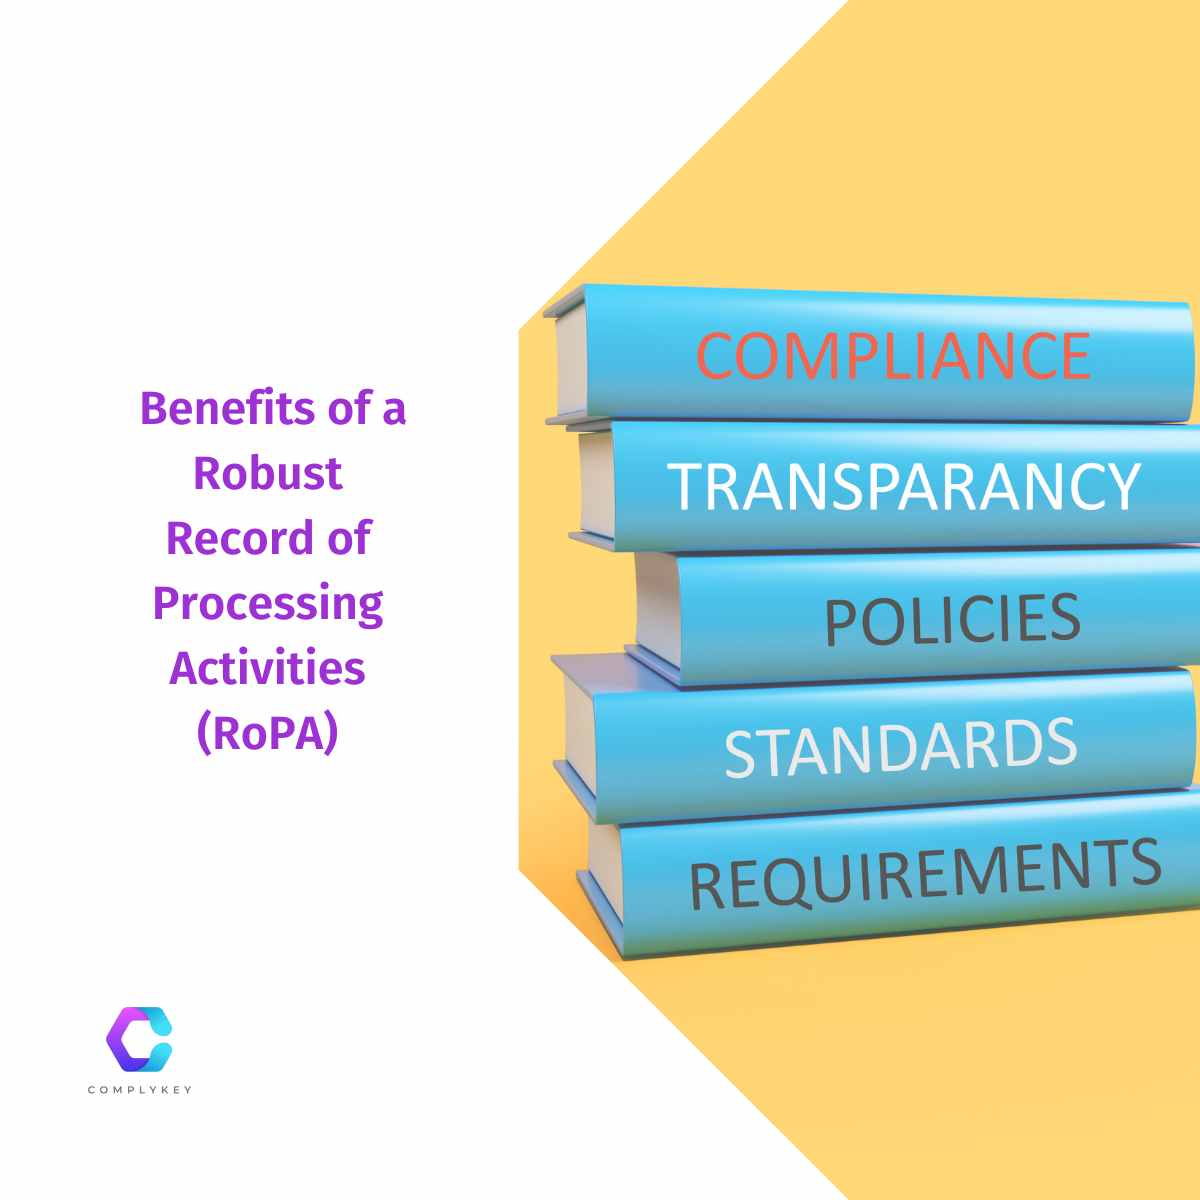 Benefits of a Robust Record of Processing Activities (RoPA)